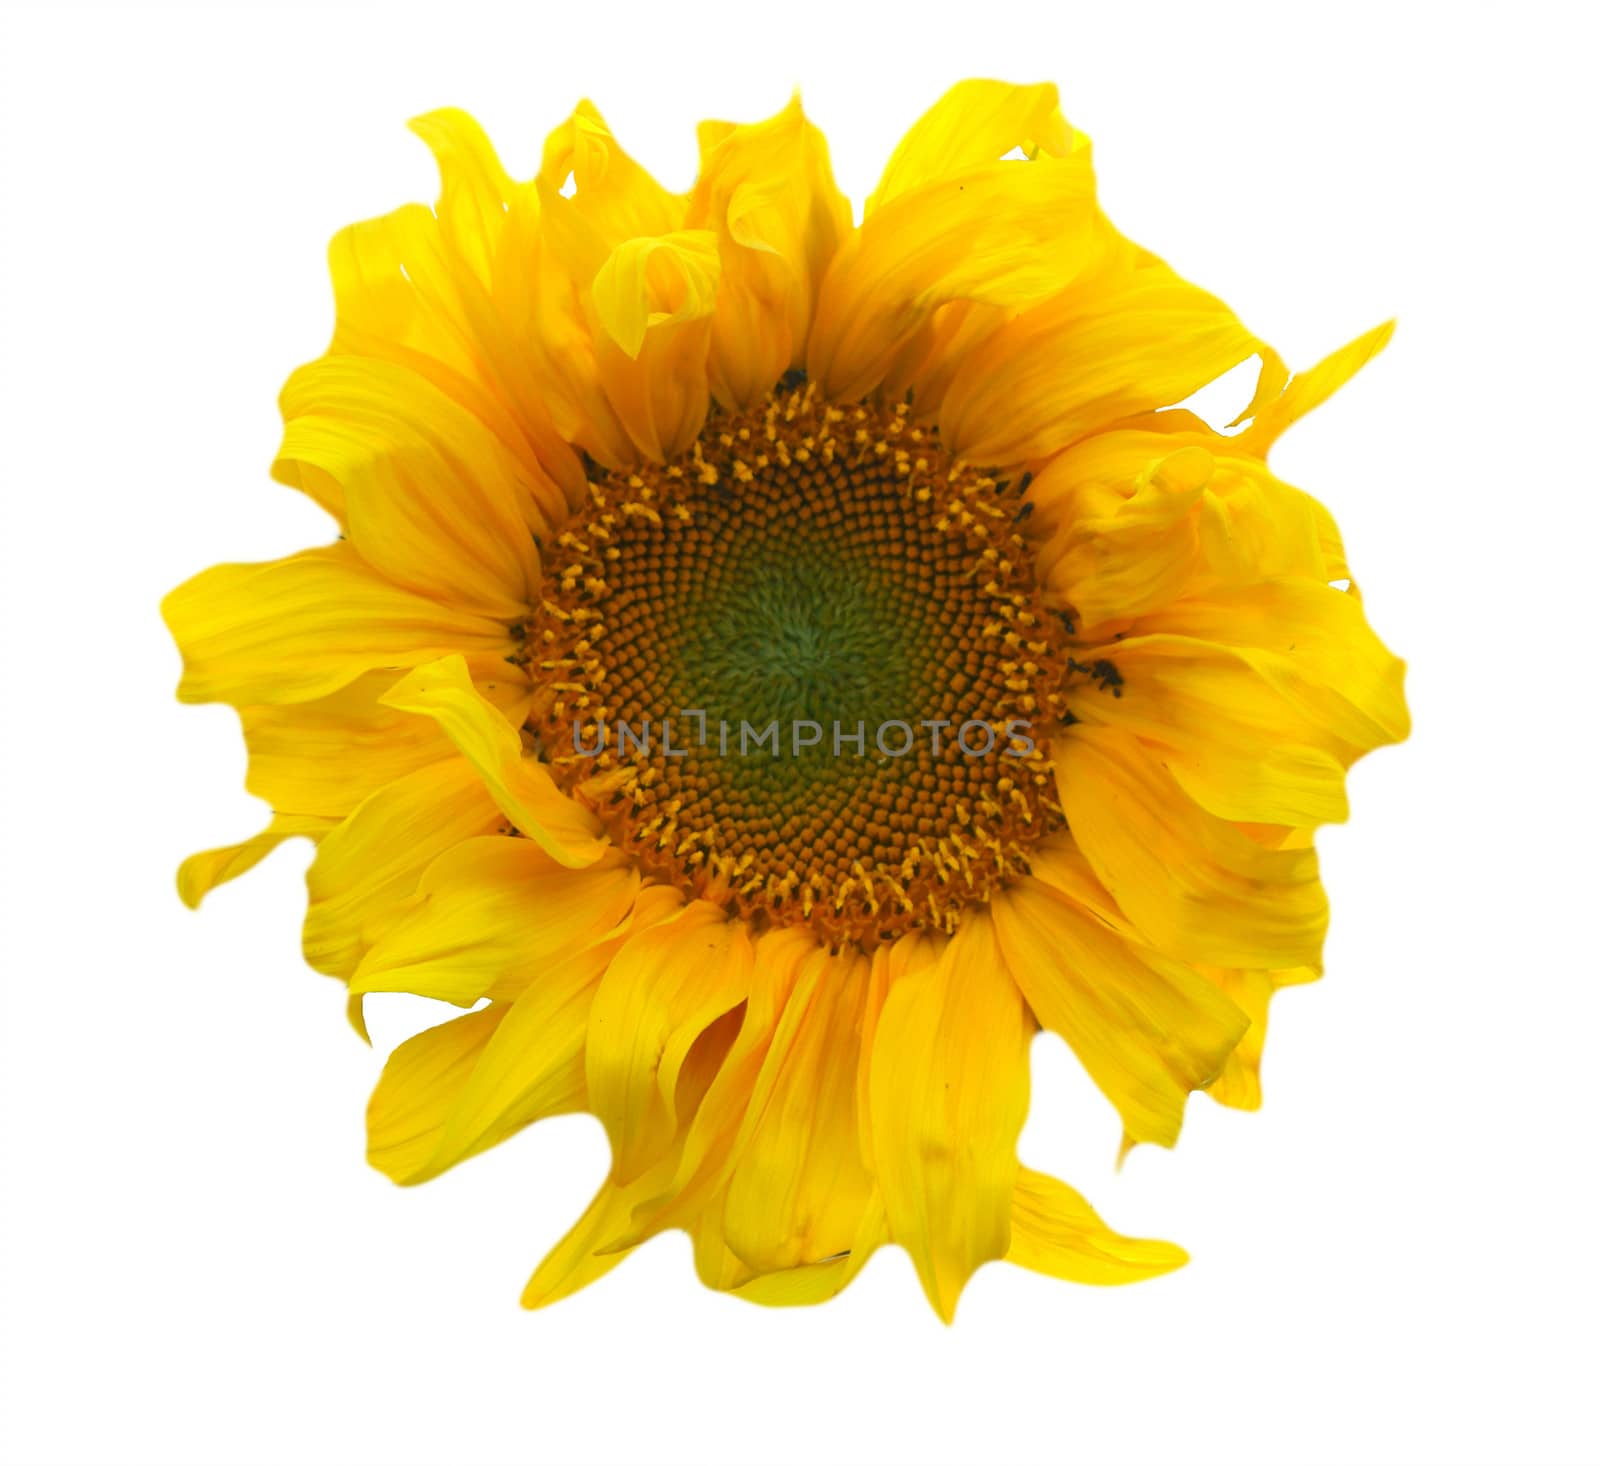 sunflower isolated on white background by cobol1964